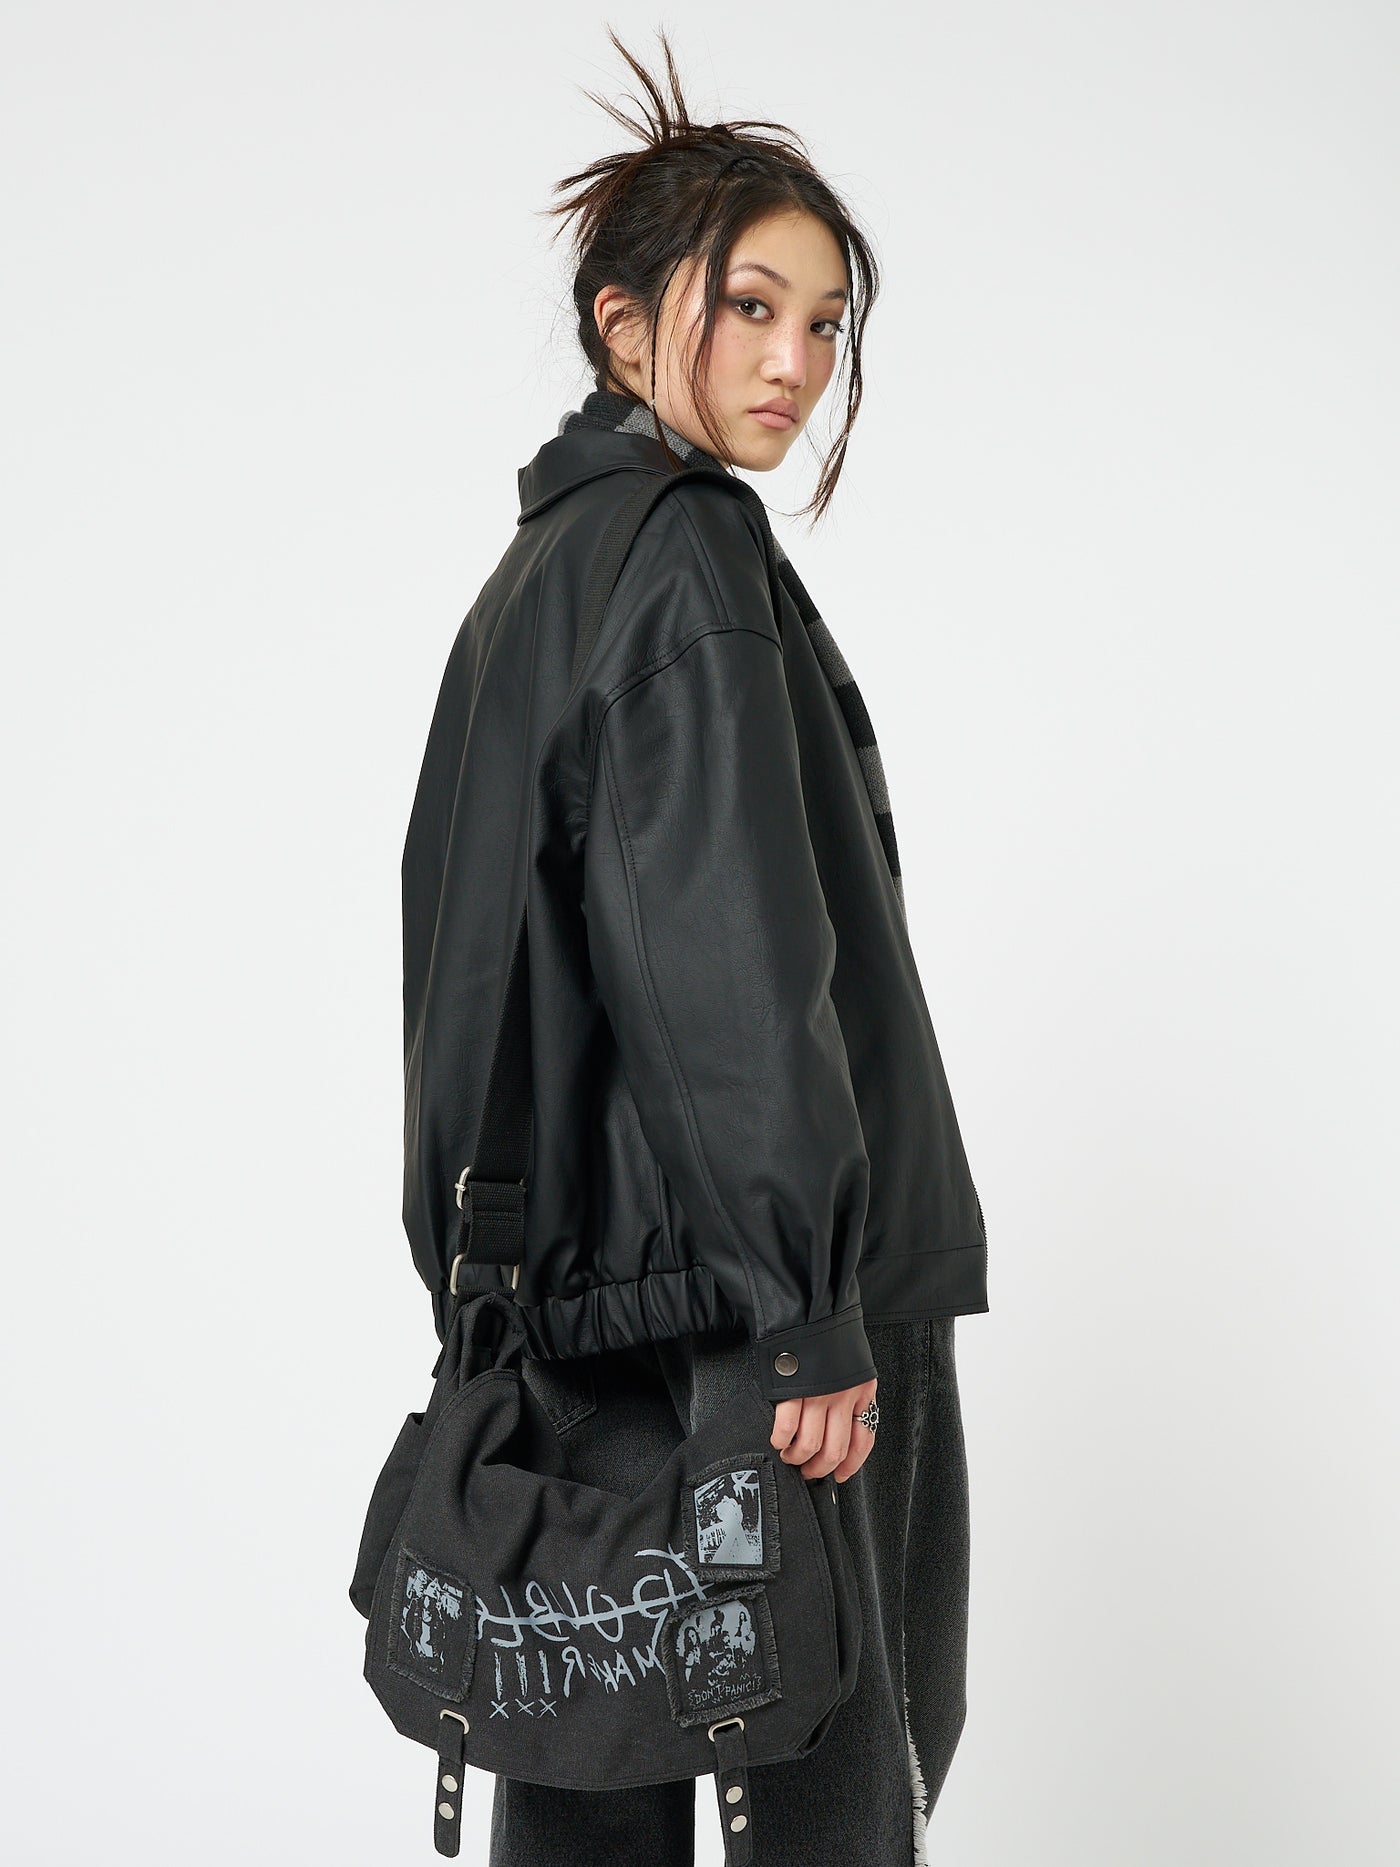 A black vegan leather bomber jacket named Olivia by Minga London. This jacket exudes a cool and edgy vibe with its bomber silhouette and sleek black vegan leather material, making it a versatile and stylish addition to your wardrobe.